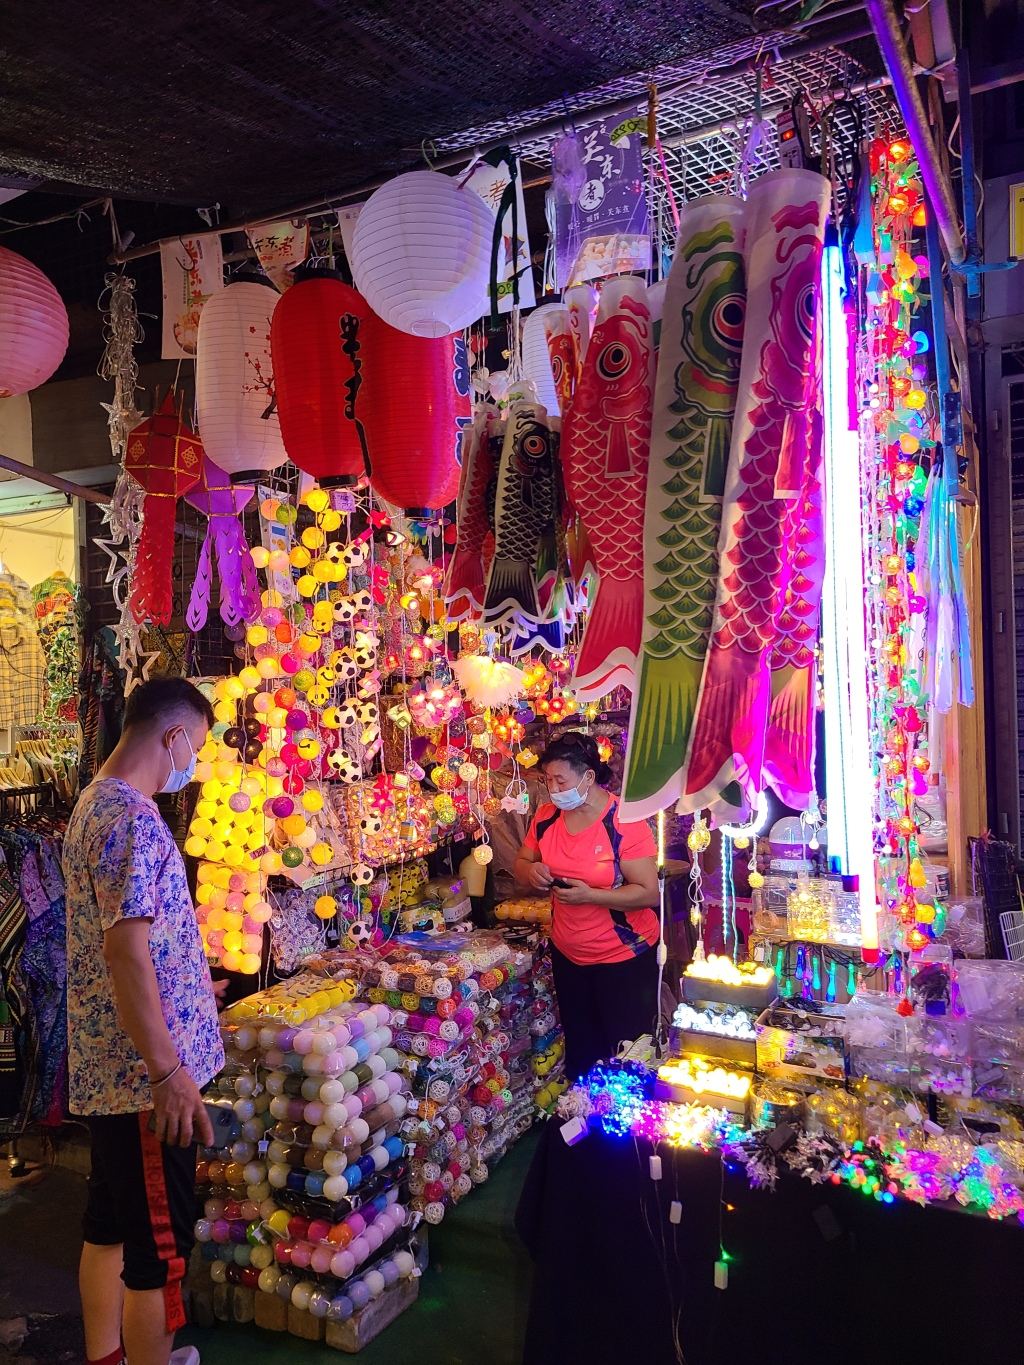 About the Chatuchak Weekend Market in Bangkok